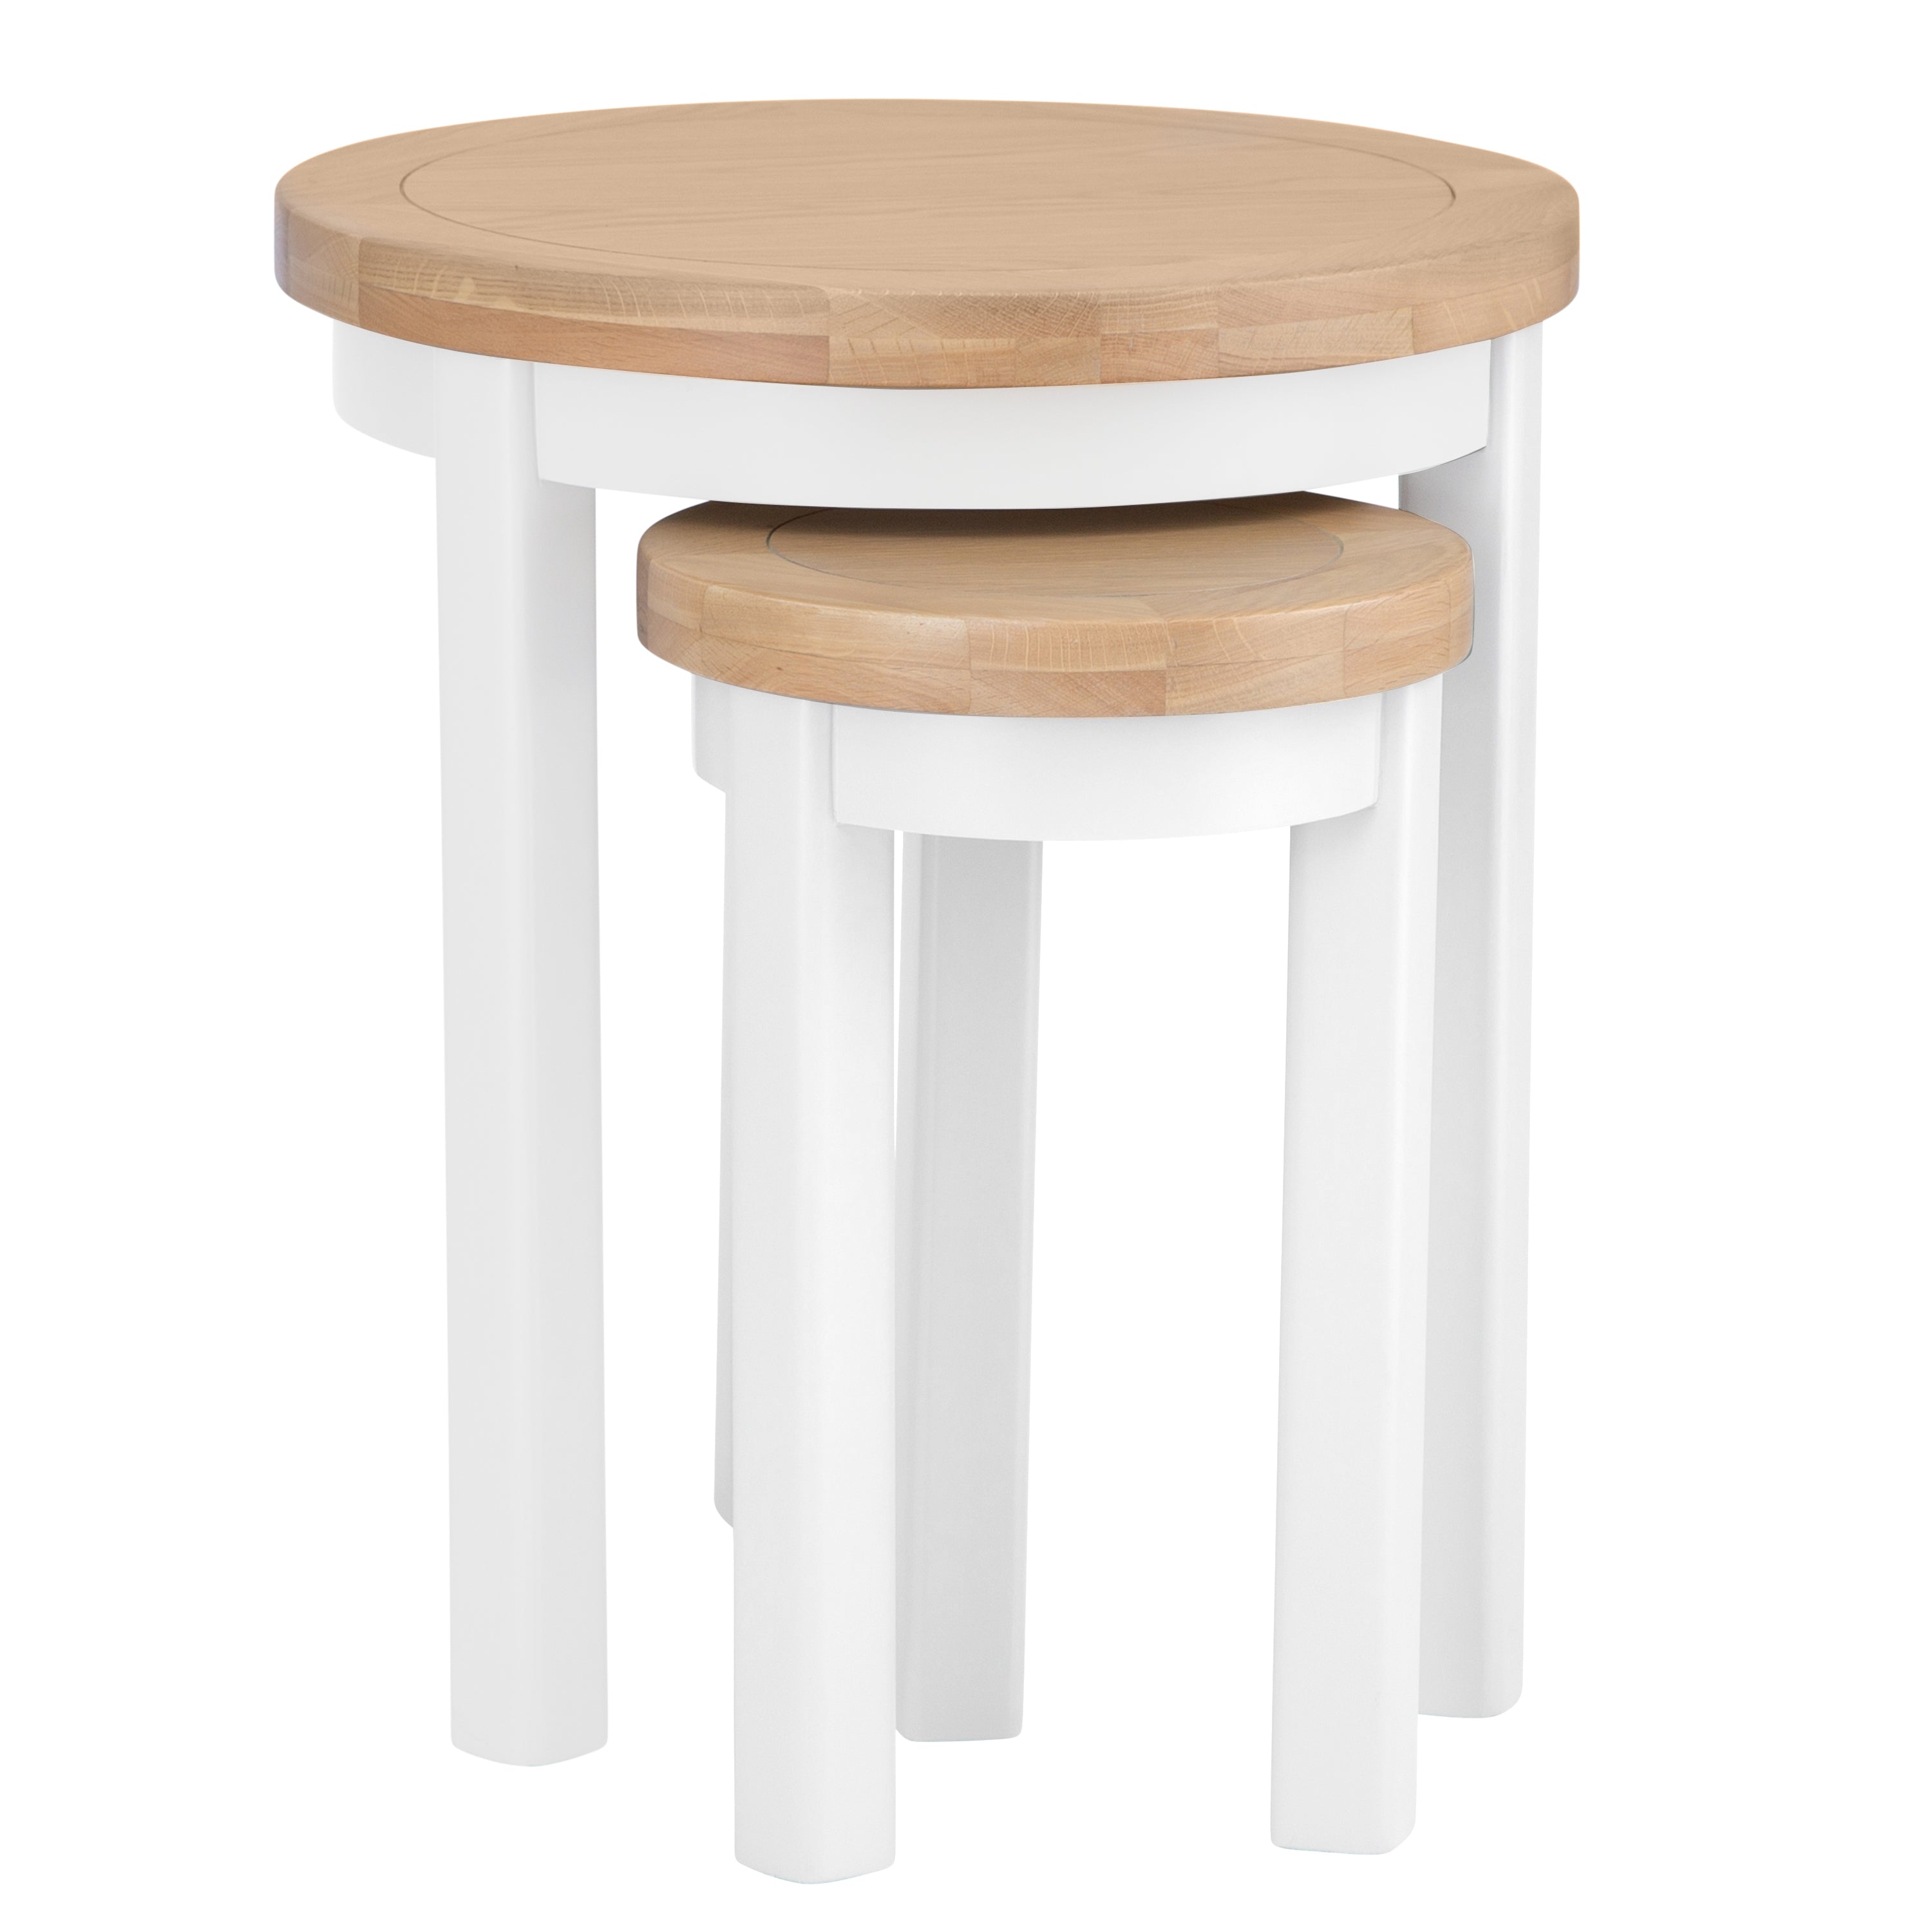 Nest of 2 Round Tables